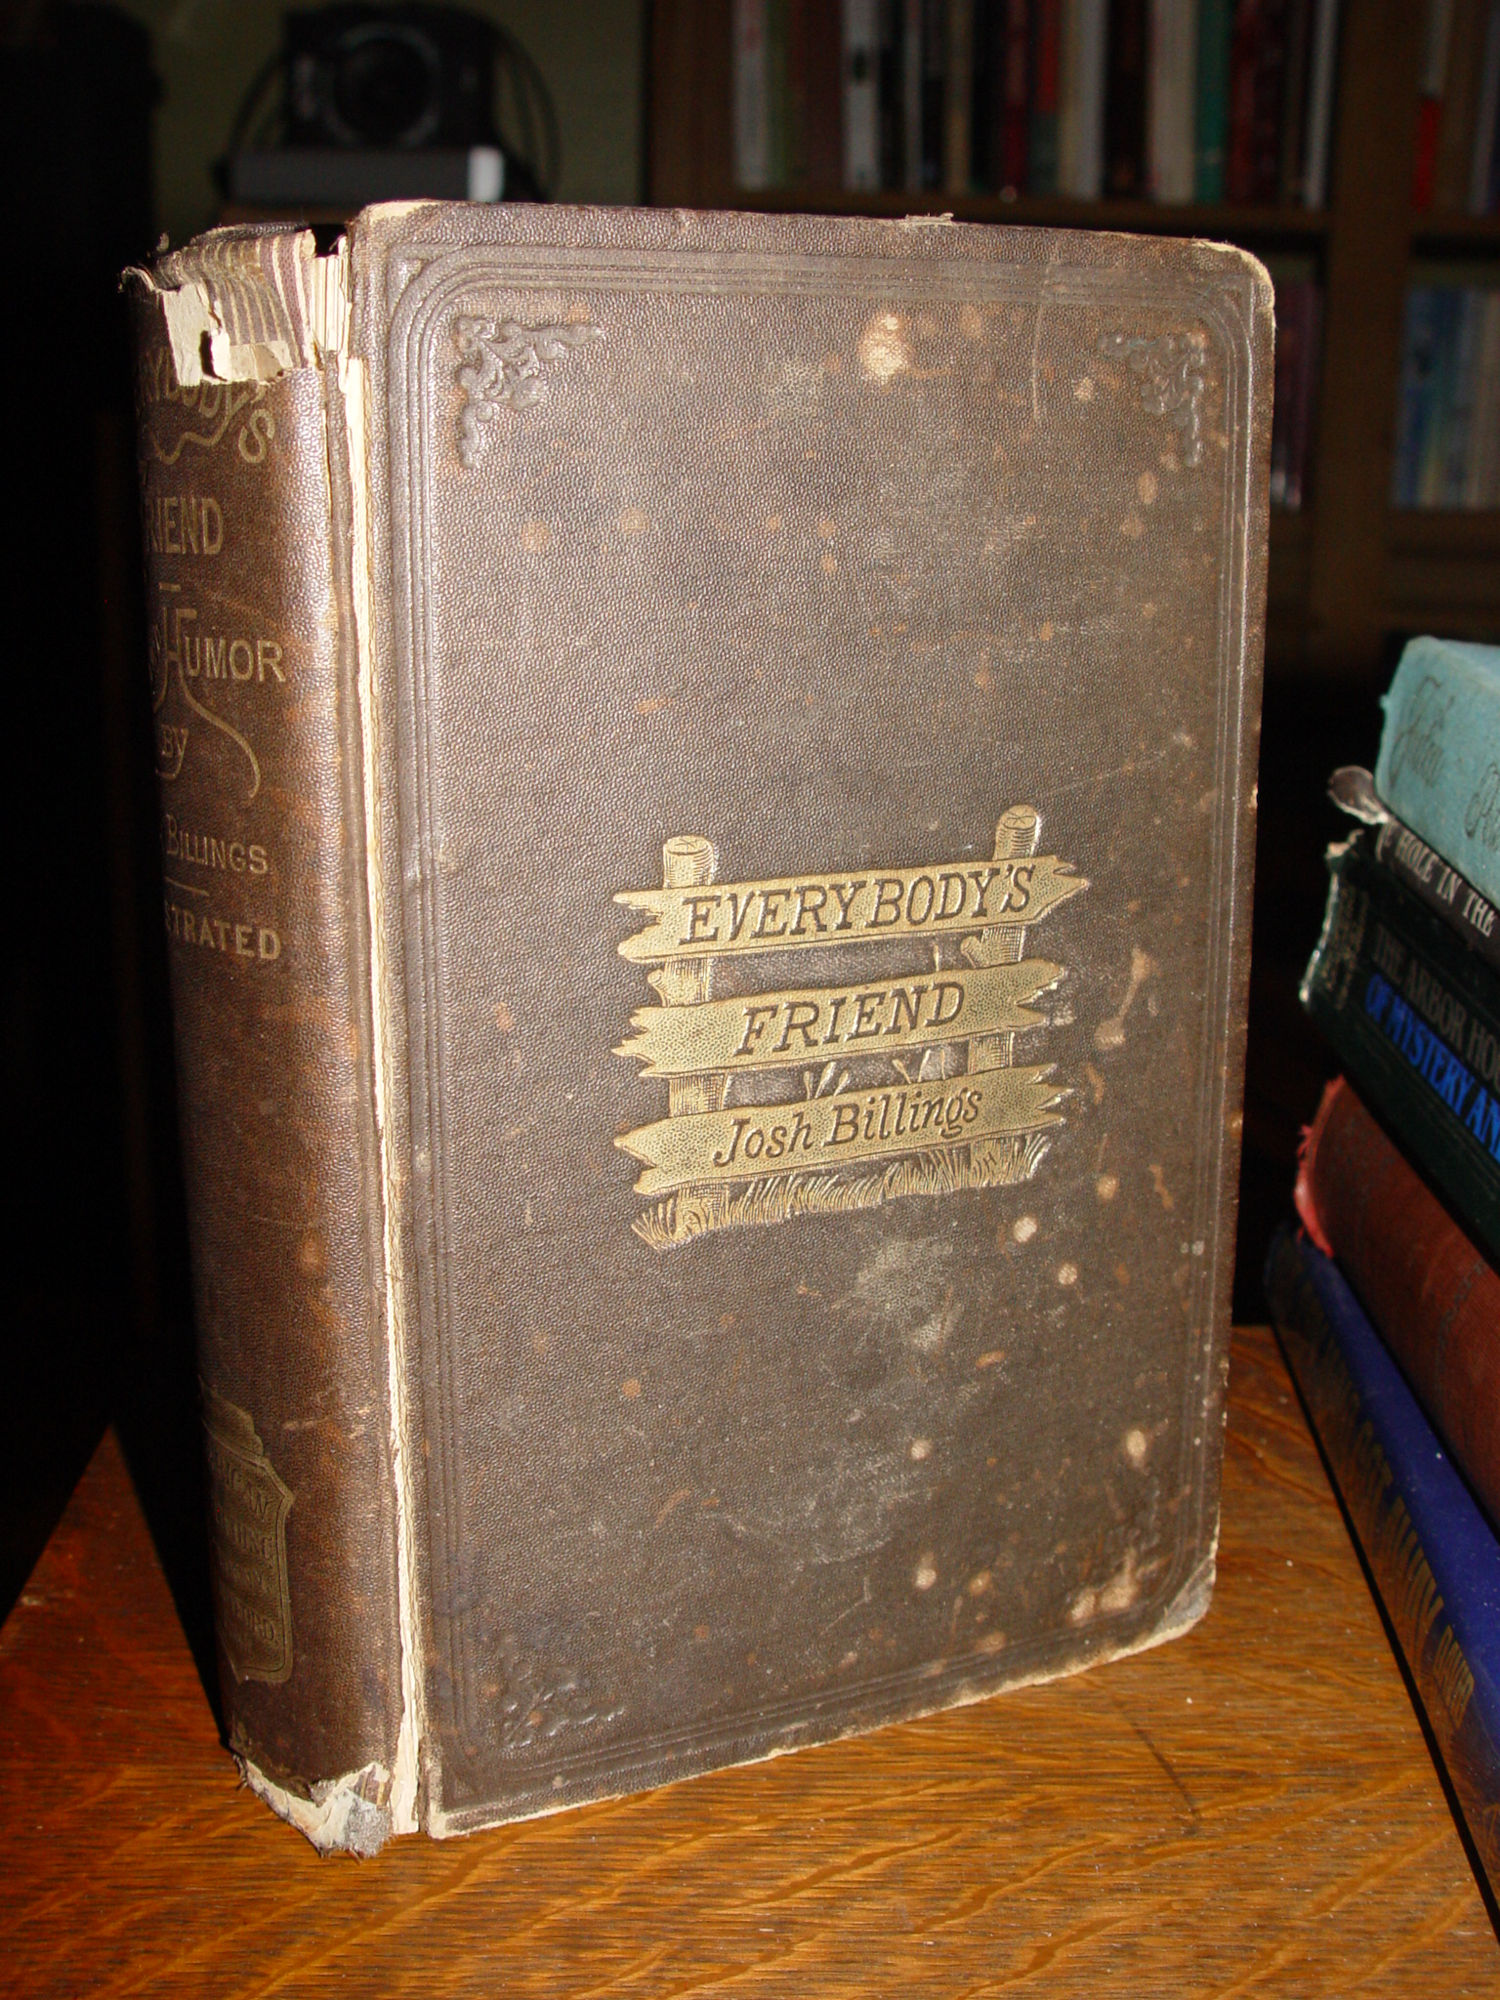 Everybody's Friend , Or; Josh Billing's
                        Philosophy of Wit and Humor 1873